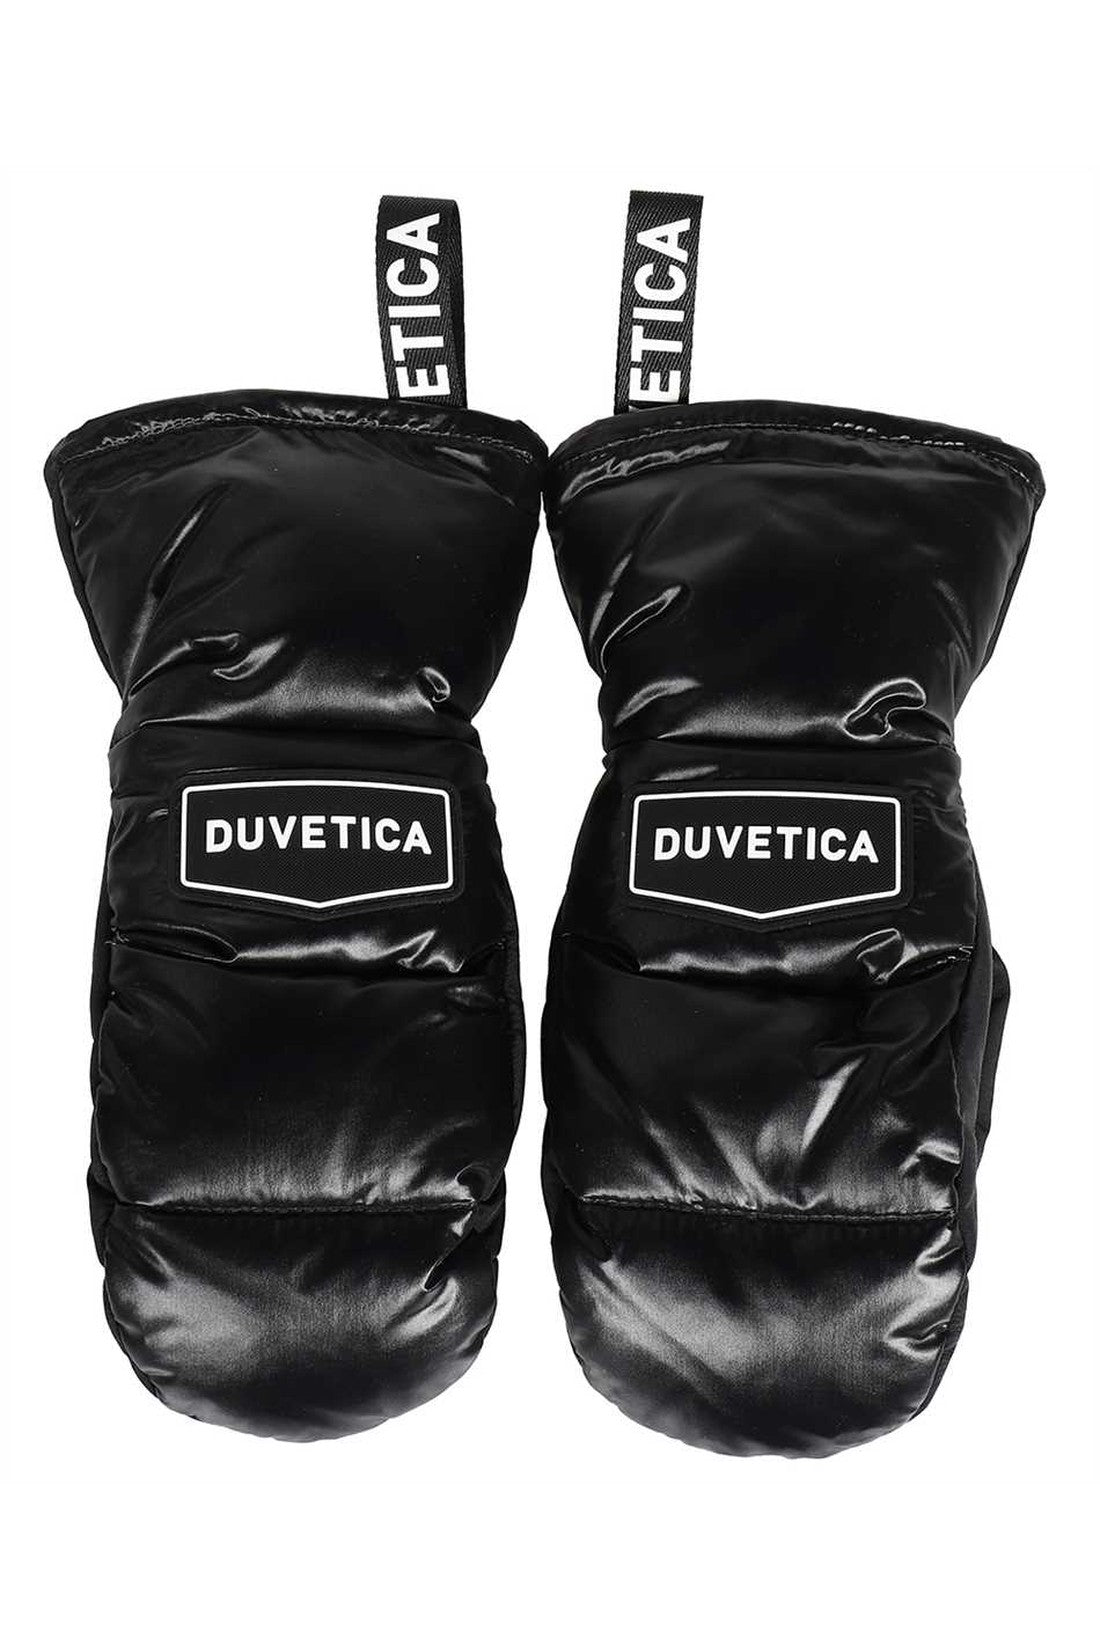 Duvetica-OUTLET-SALE-Gloves-Handschuhe-M-ARCHIVE-COLLECTION-3.jpg